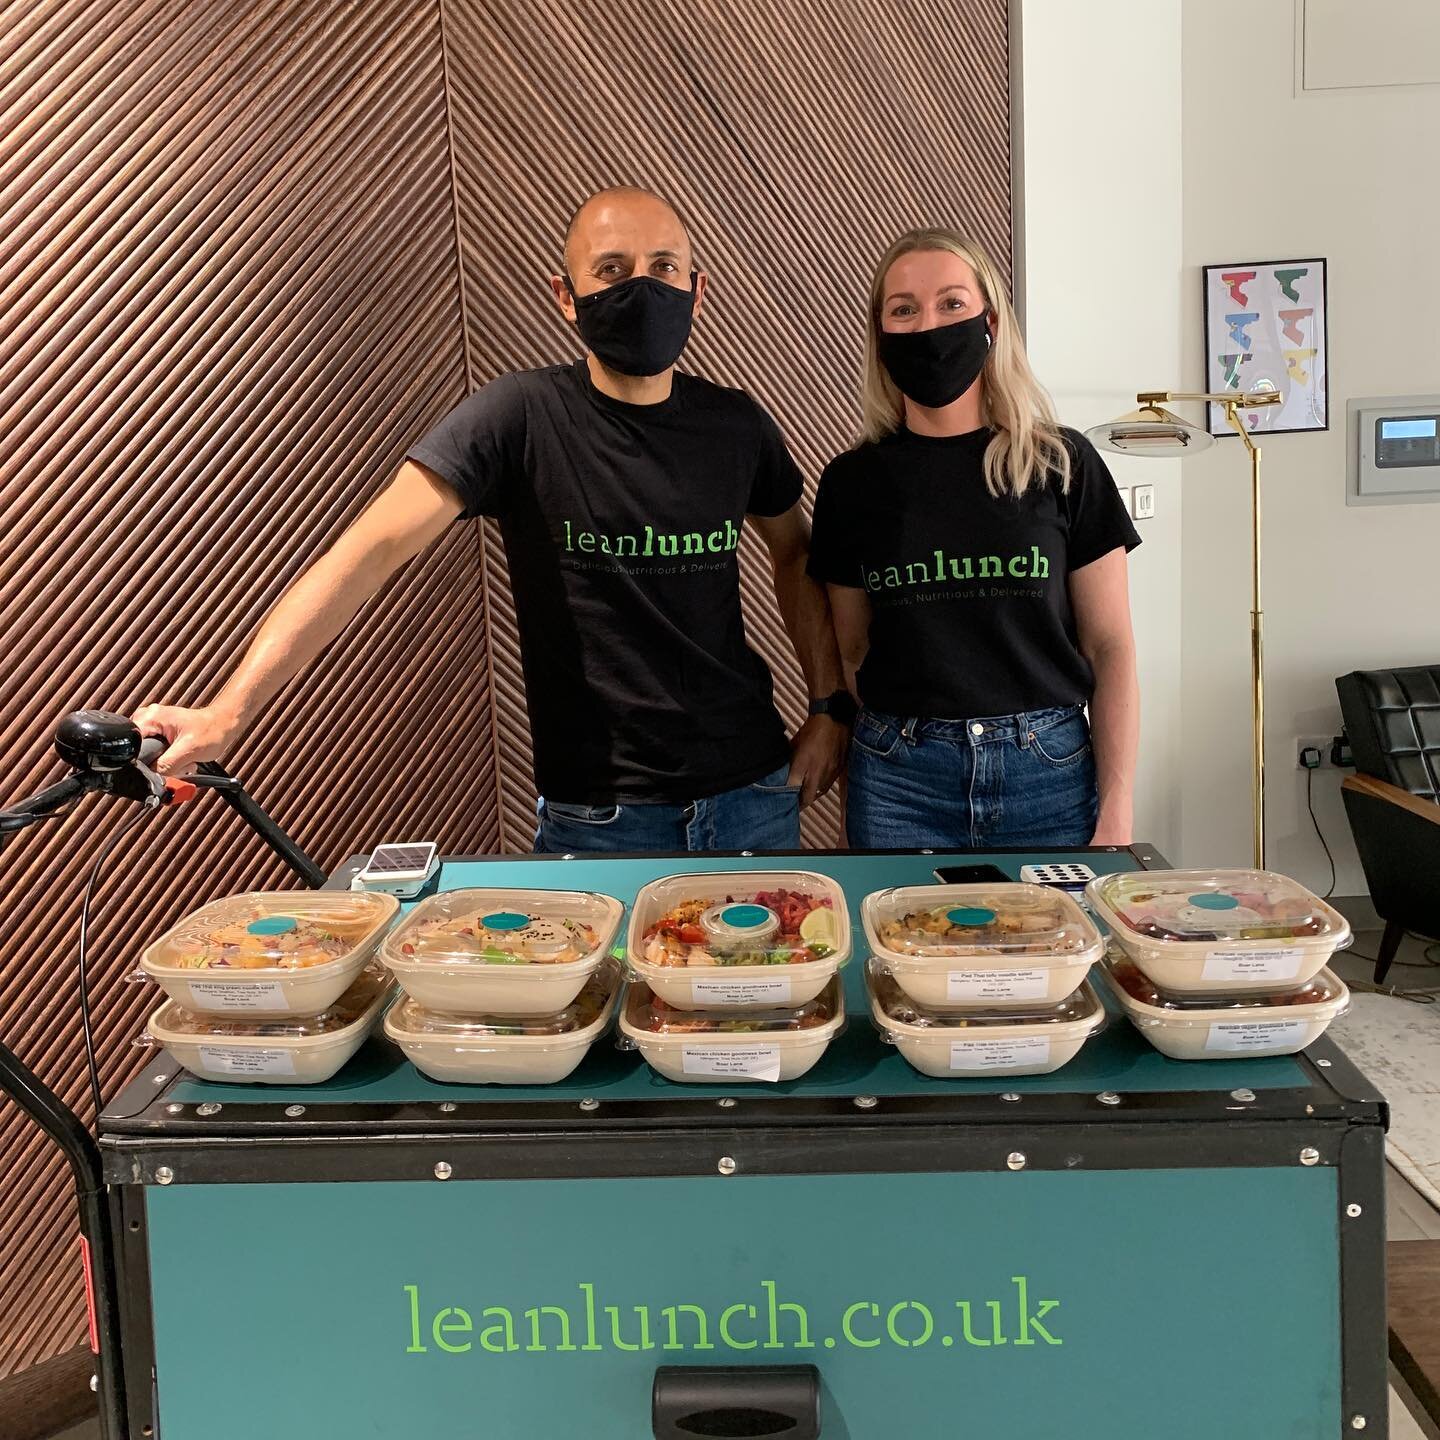 Sat and Charlotte are back with more of the good stuff. Swing by our @leanlunchuk pop-up for a bowl of deliciousness and get a free drink or snack thrown in. Find them in reception from 11:45-13:30 today. All welcome!